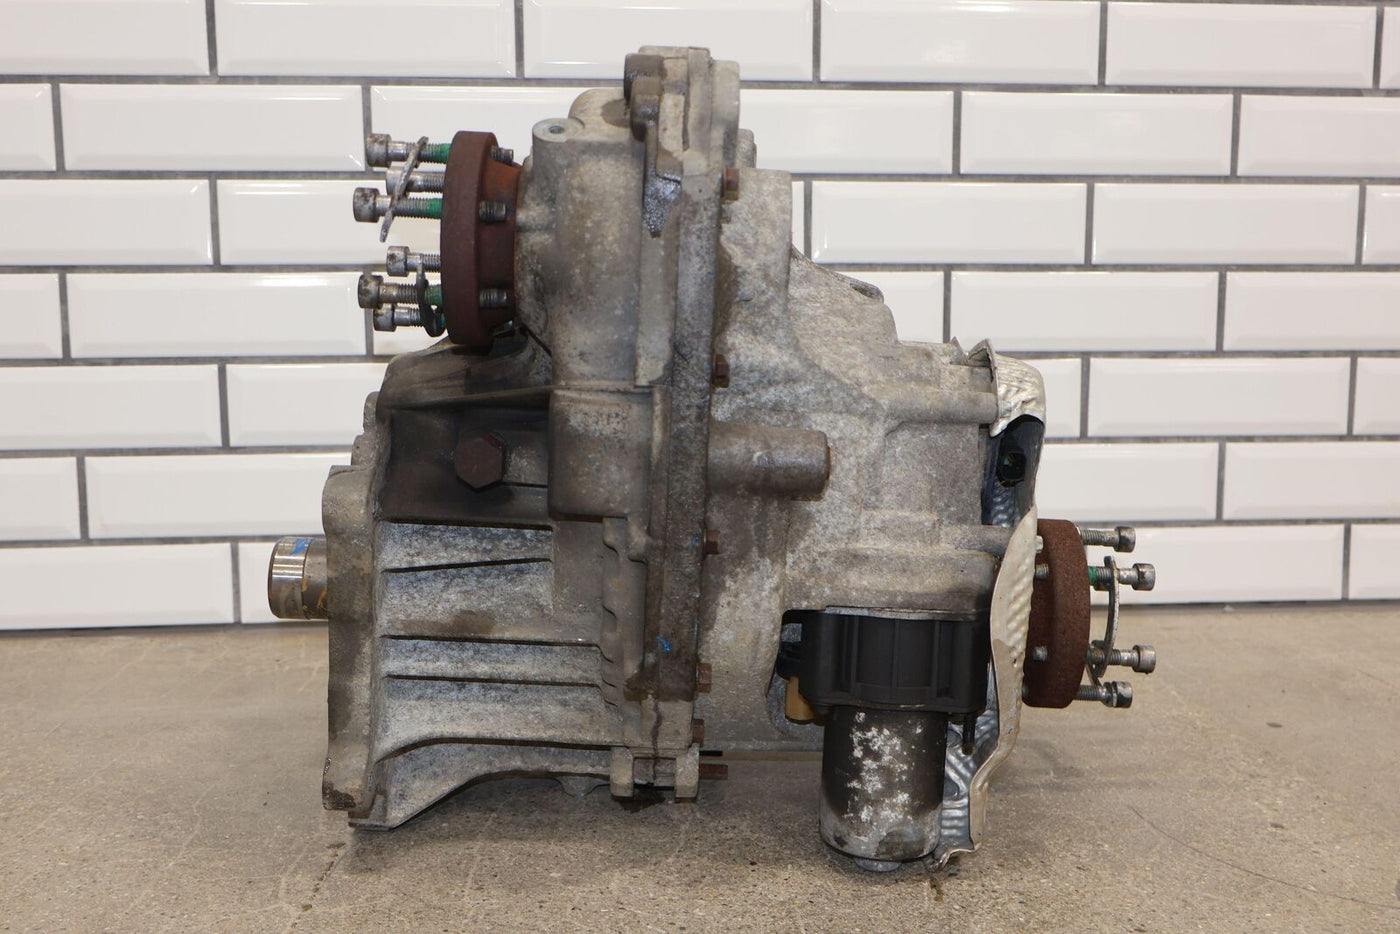 14-21 Jeep Grand Cherokee SRT8 4x4 Transfer Case (Unable To test) 96K Miles